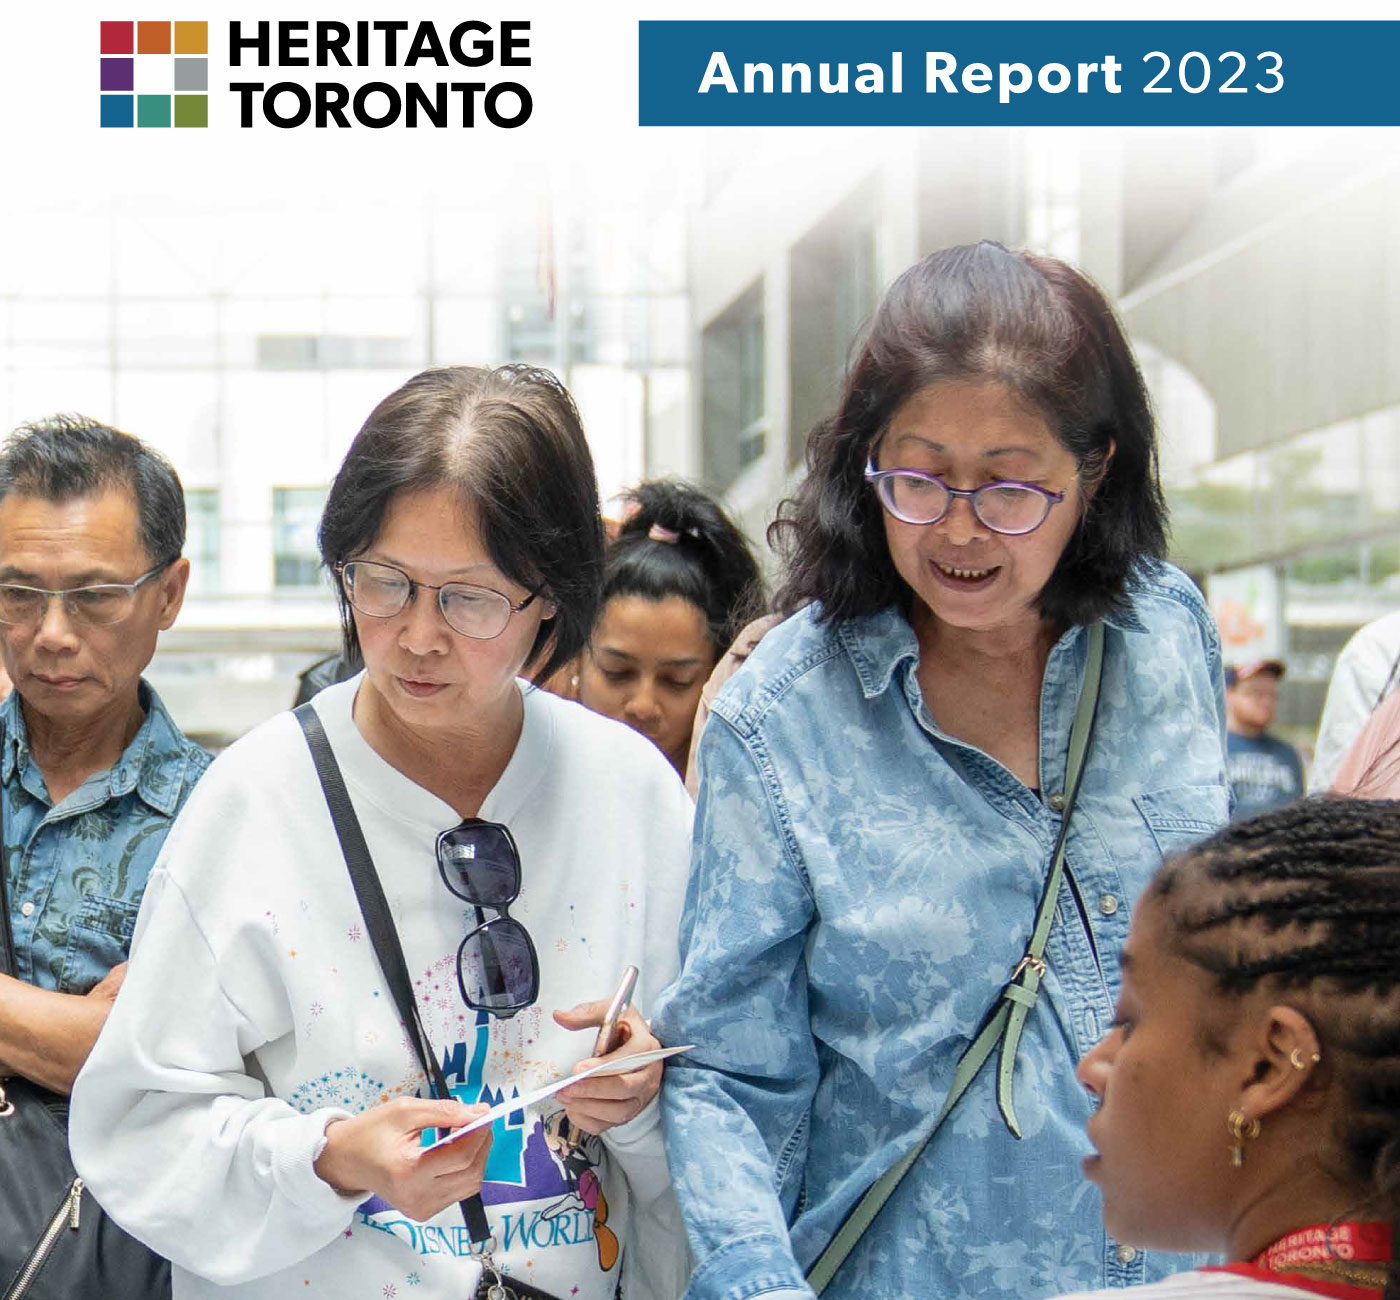 Graphic showing an image of a group of people with logo of Heritage Toronto and text reading Annual Report 2023